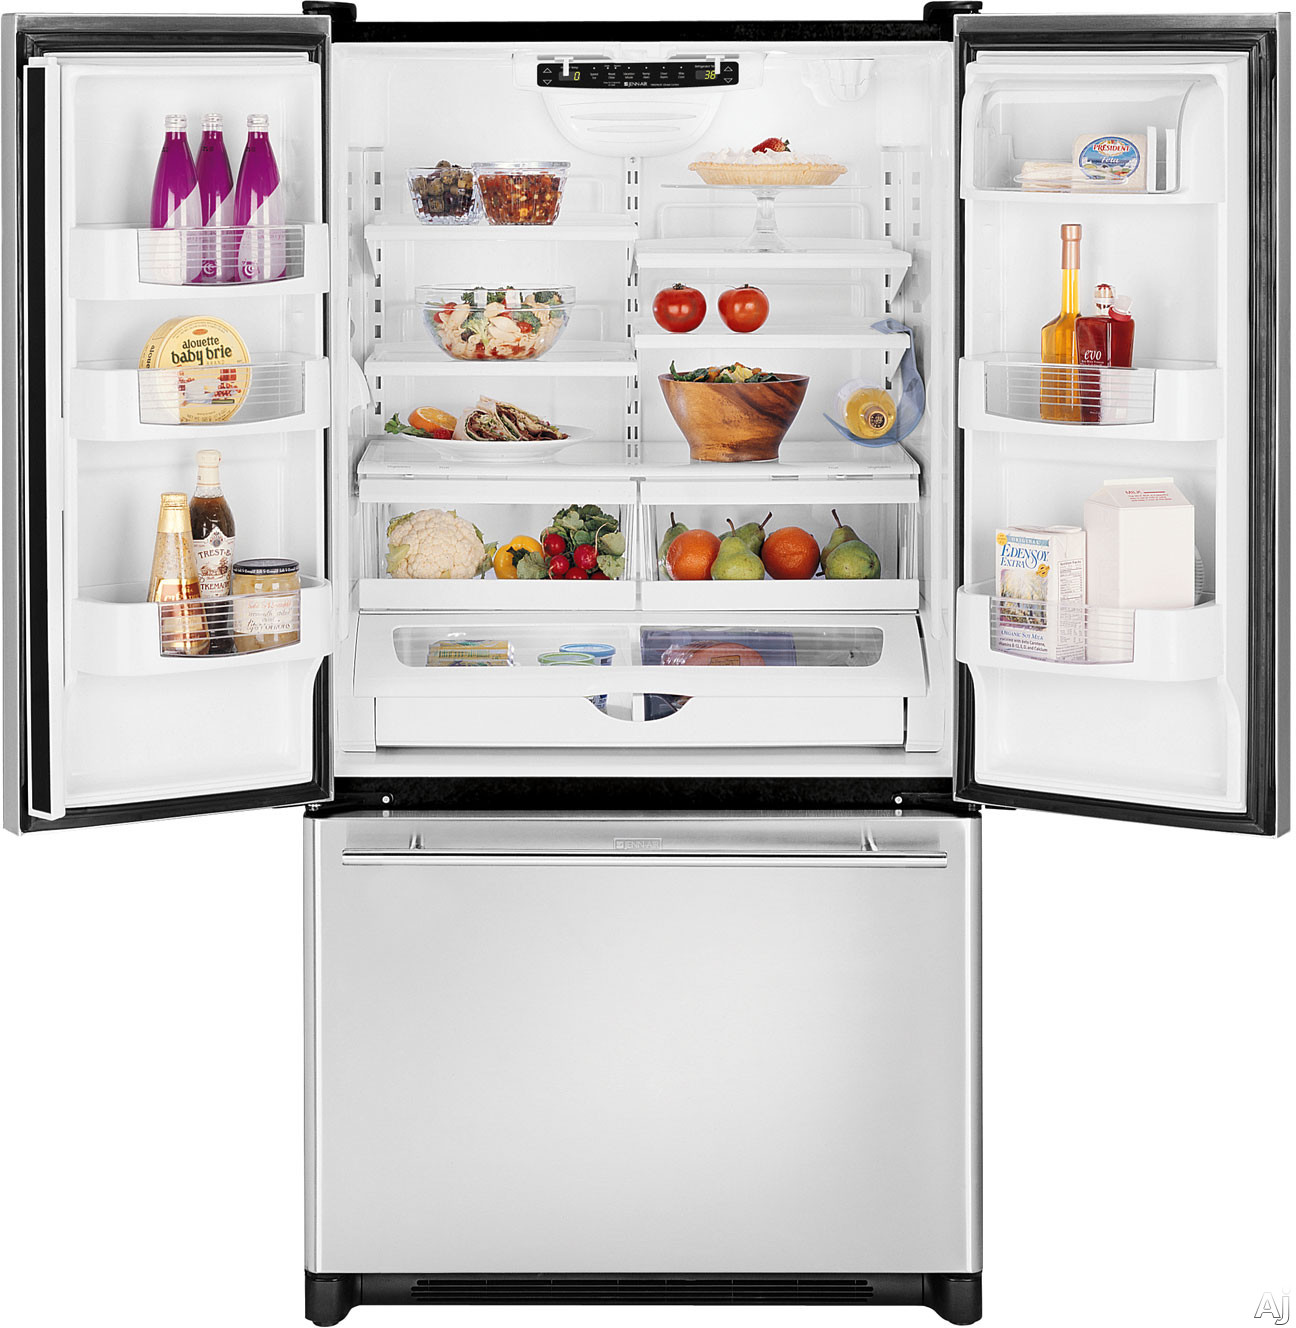 Jenn-Air JFC2089HES 20 Cu. Ft. French Door Bottom-Freezer Counter Depth Refrigerator with Internal Water Dispenser (Panel Ready Availible): Stainless Steel